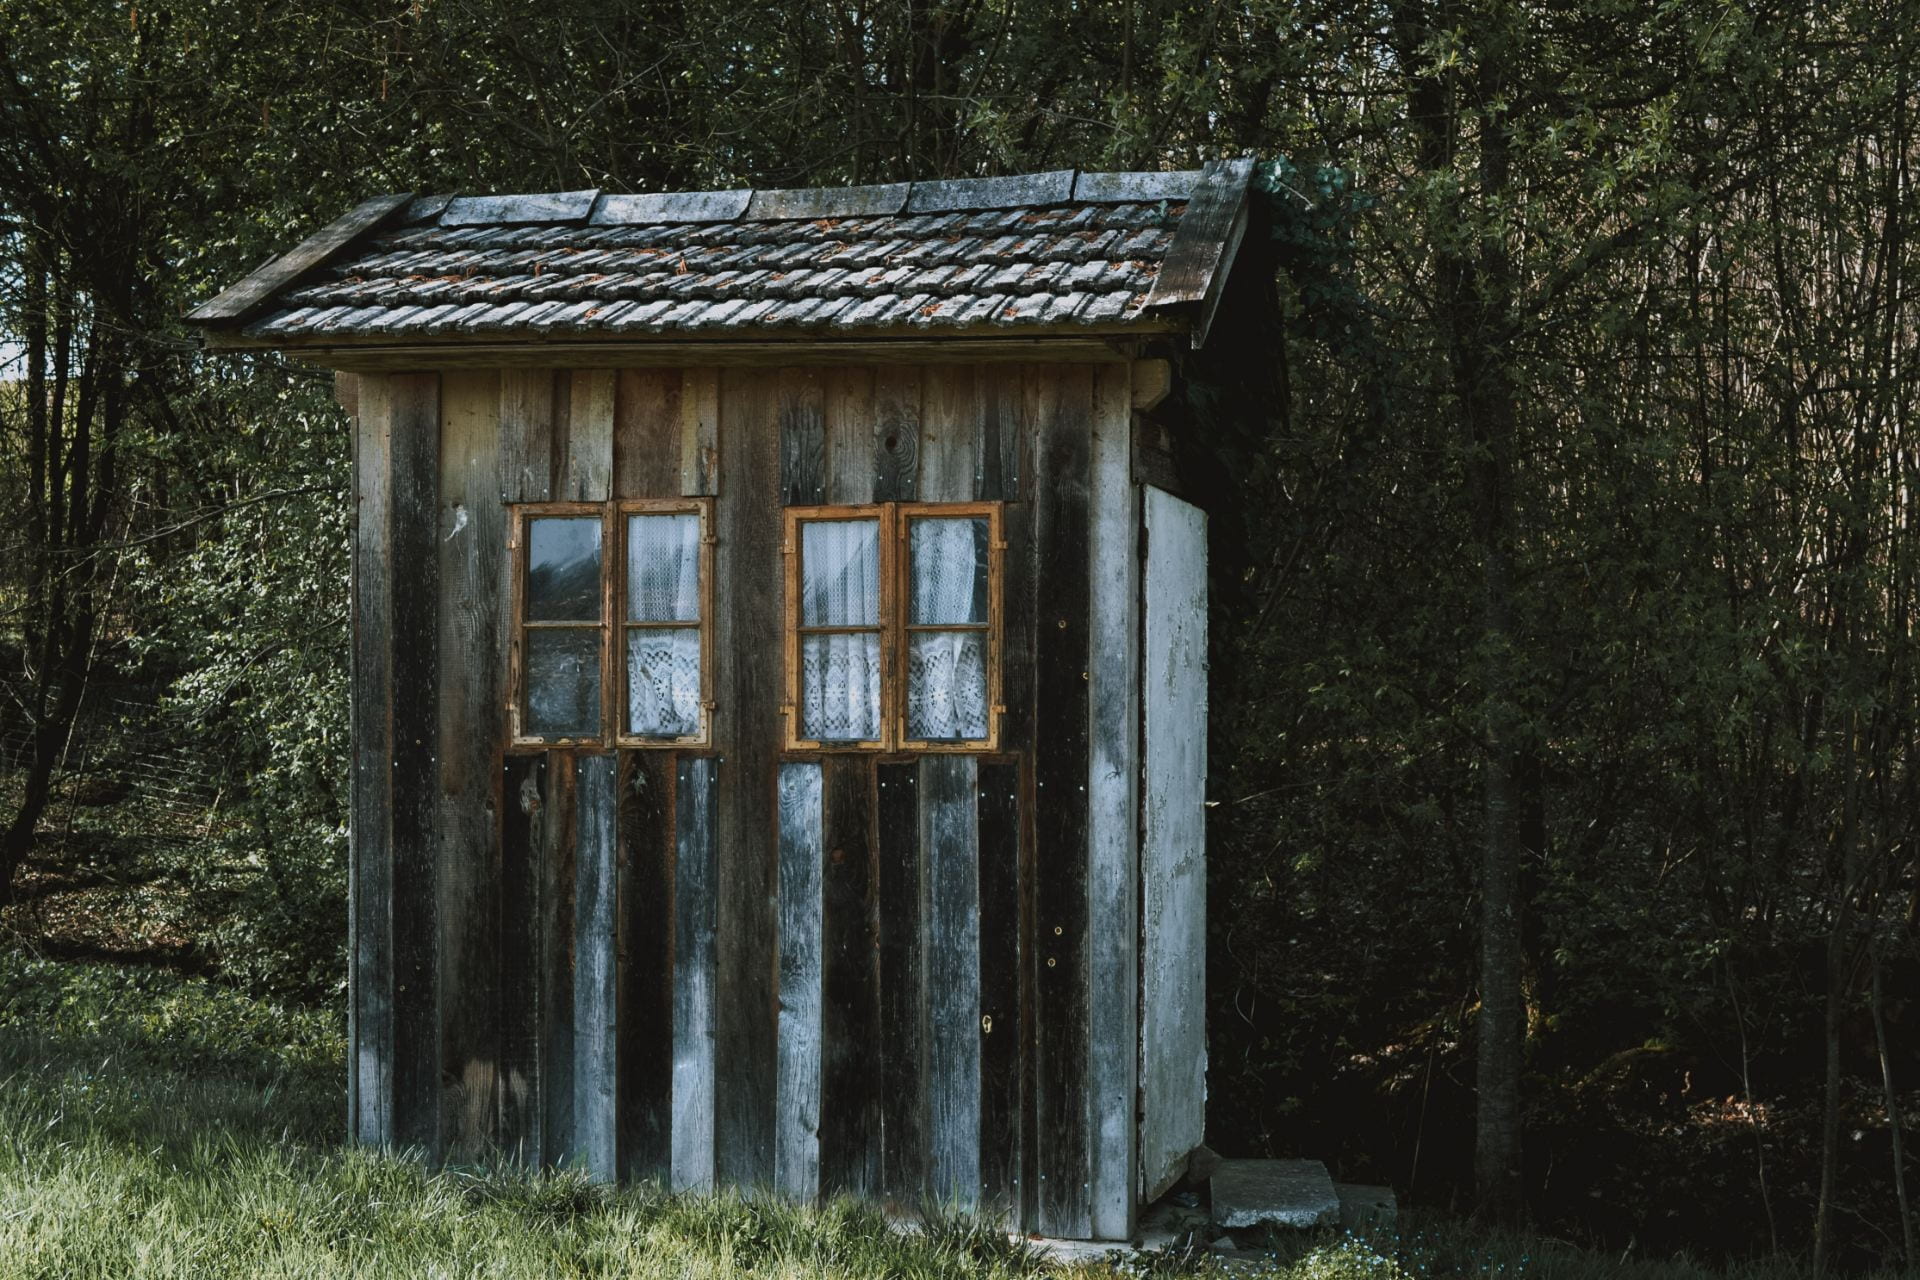 A dilapidated wooden shed with some white paint on the door and bottom boards. It has two windows with broken glass and rusty frames. Behind it its dense woods.